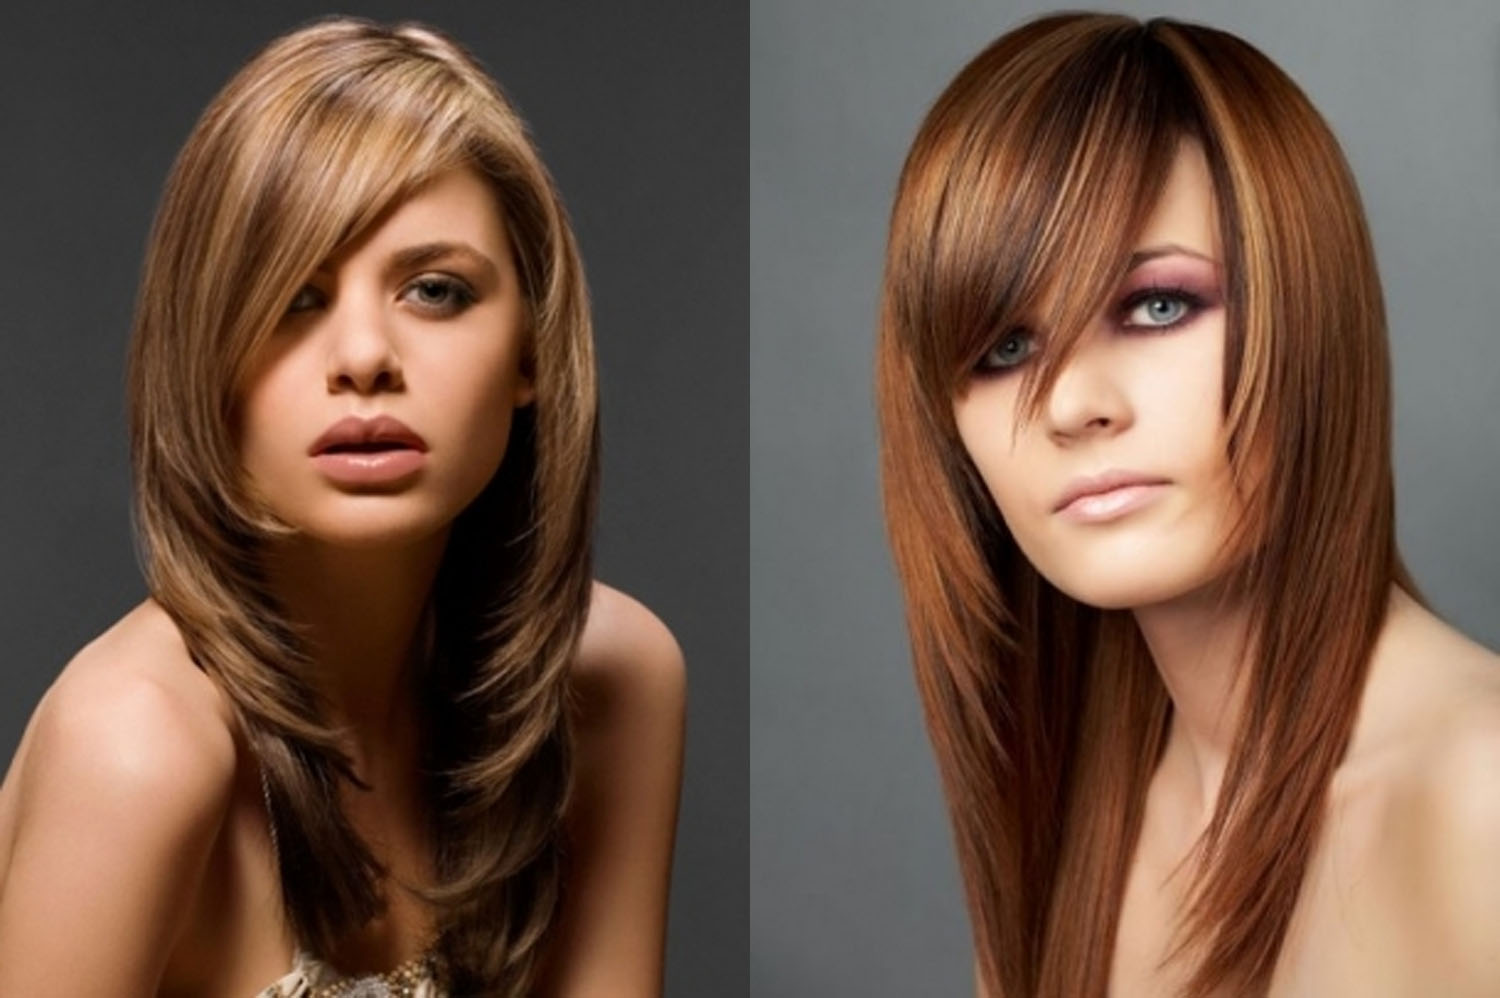 Top 10 HairStyles Trends 2012 - blondelacquer